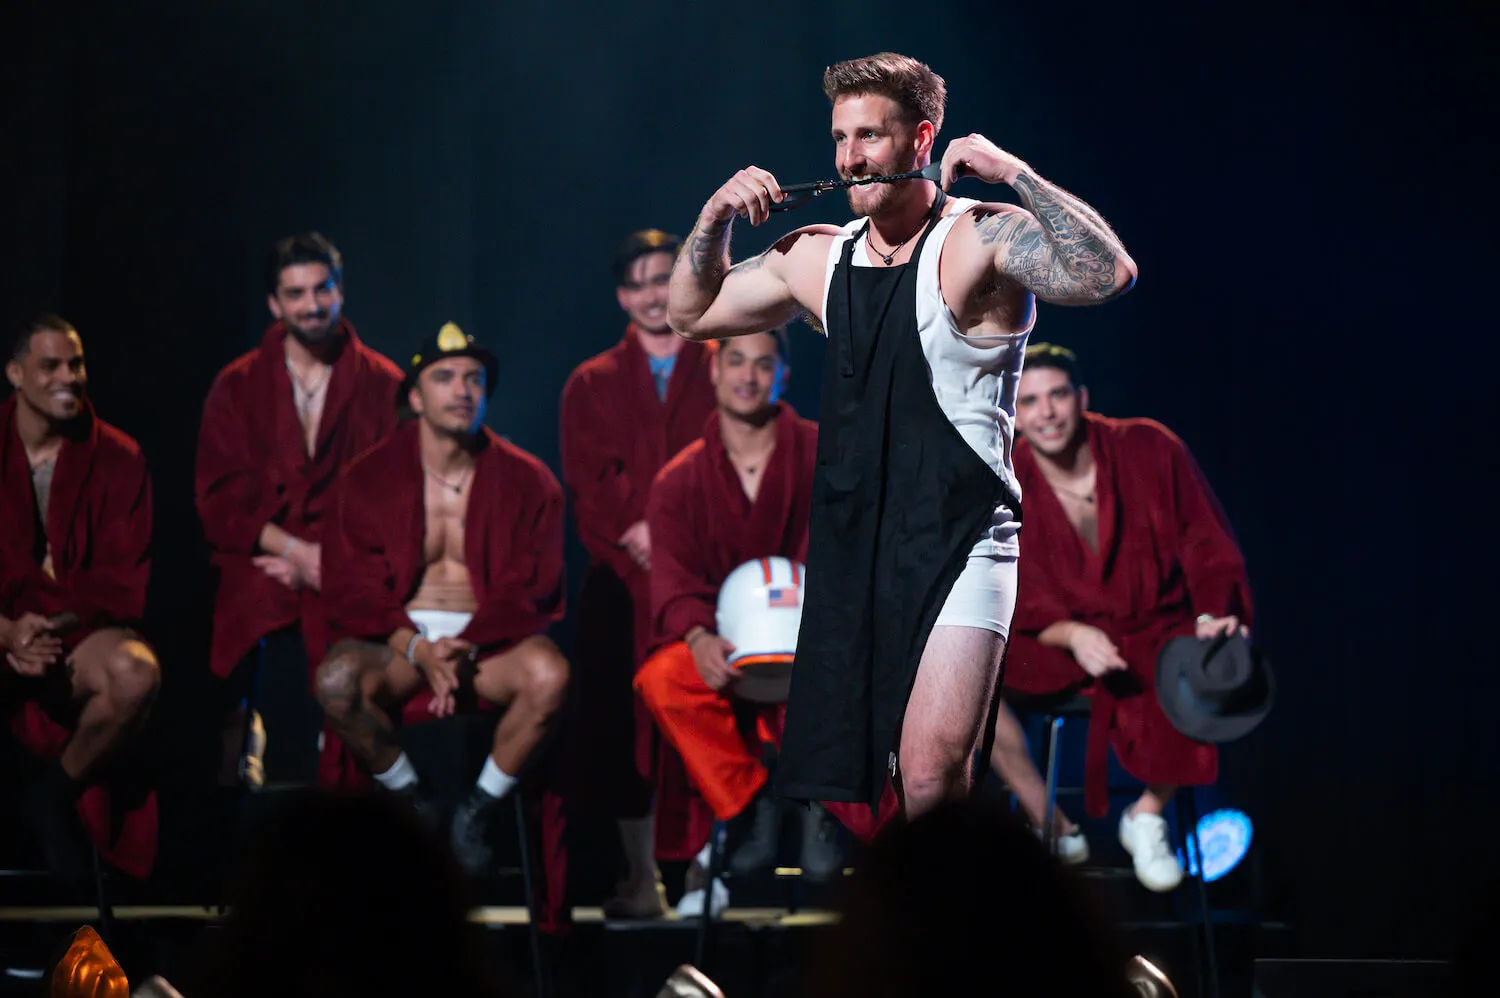 Sam McKinney during a strip tease date in 'The Bachelorette' Season 21. He's walking down a catwalk in front of the other contestants ready to strip.